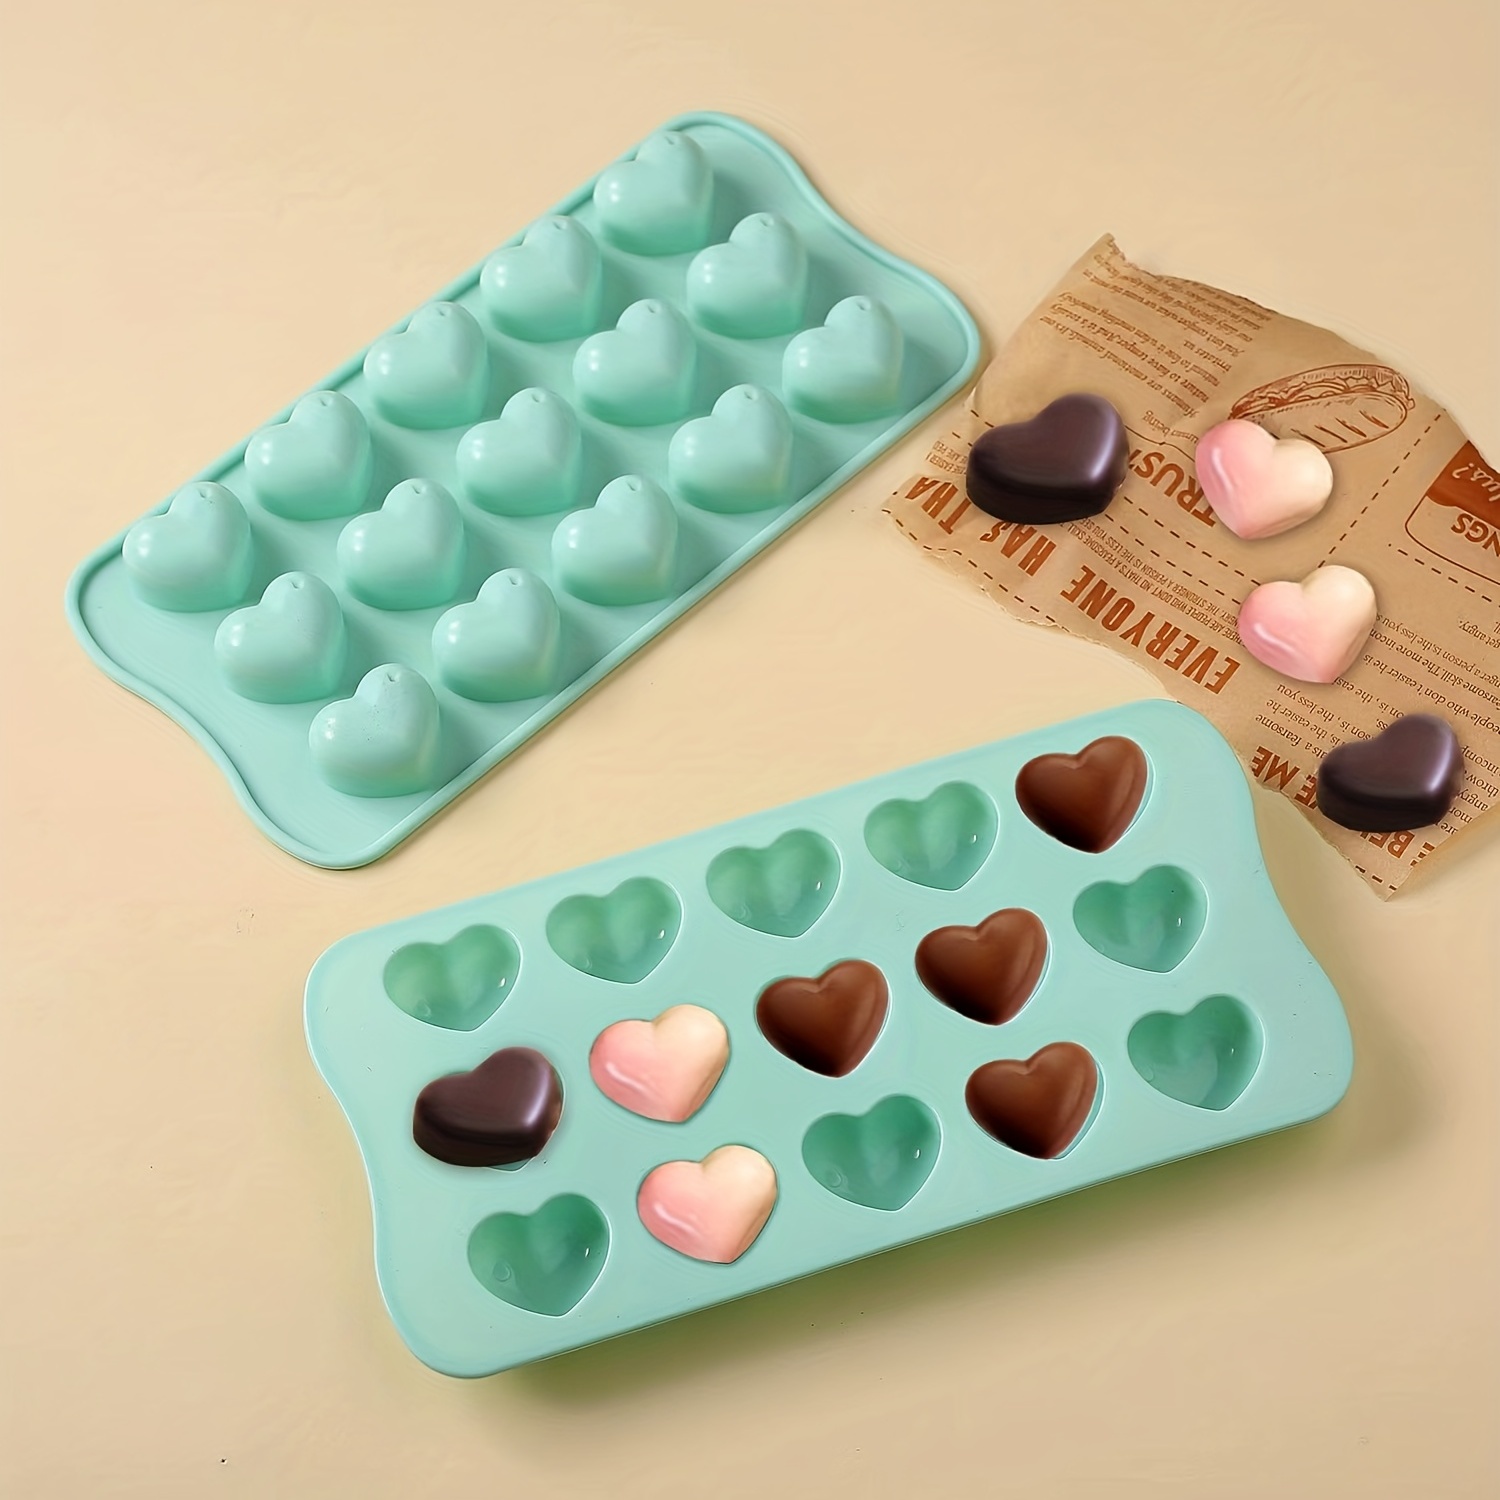 Bite Size Heart Candy Molds - Confectionery House